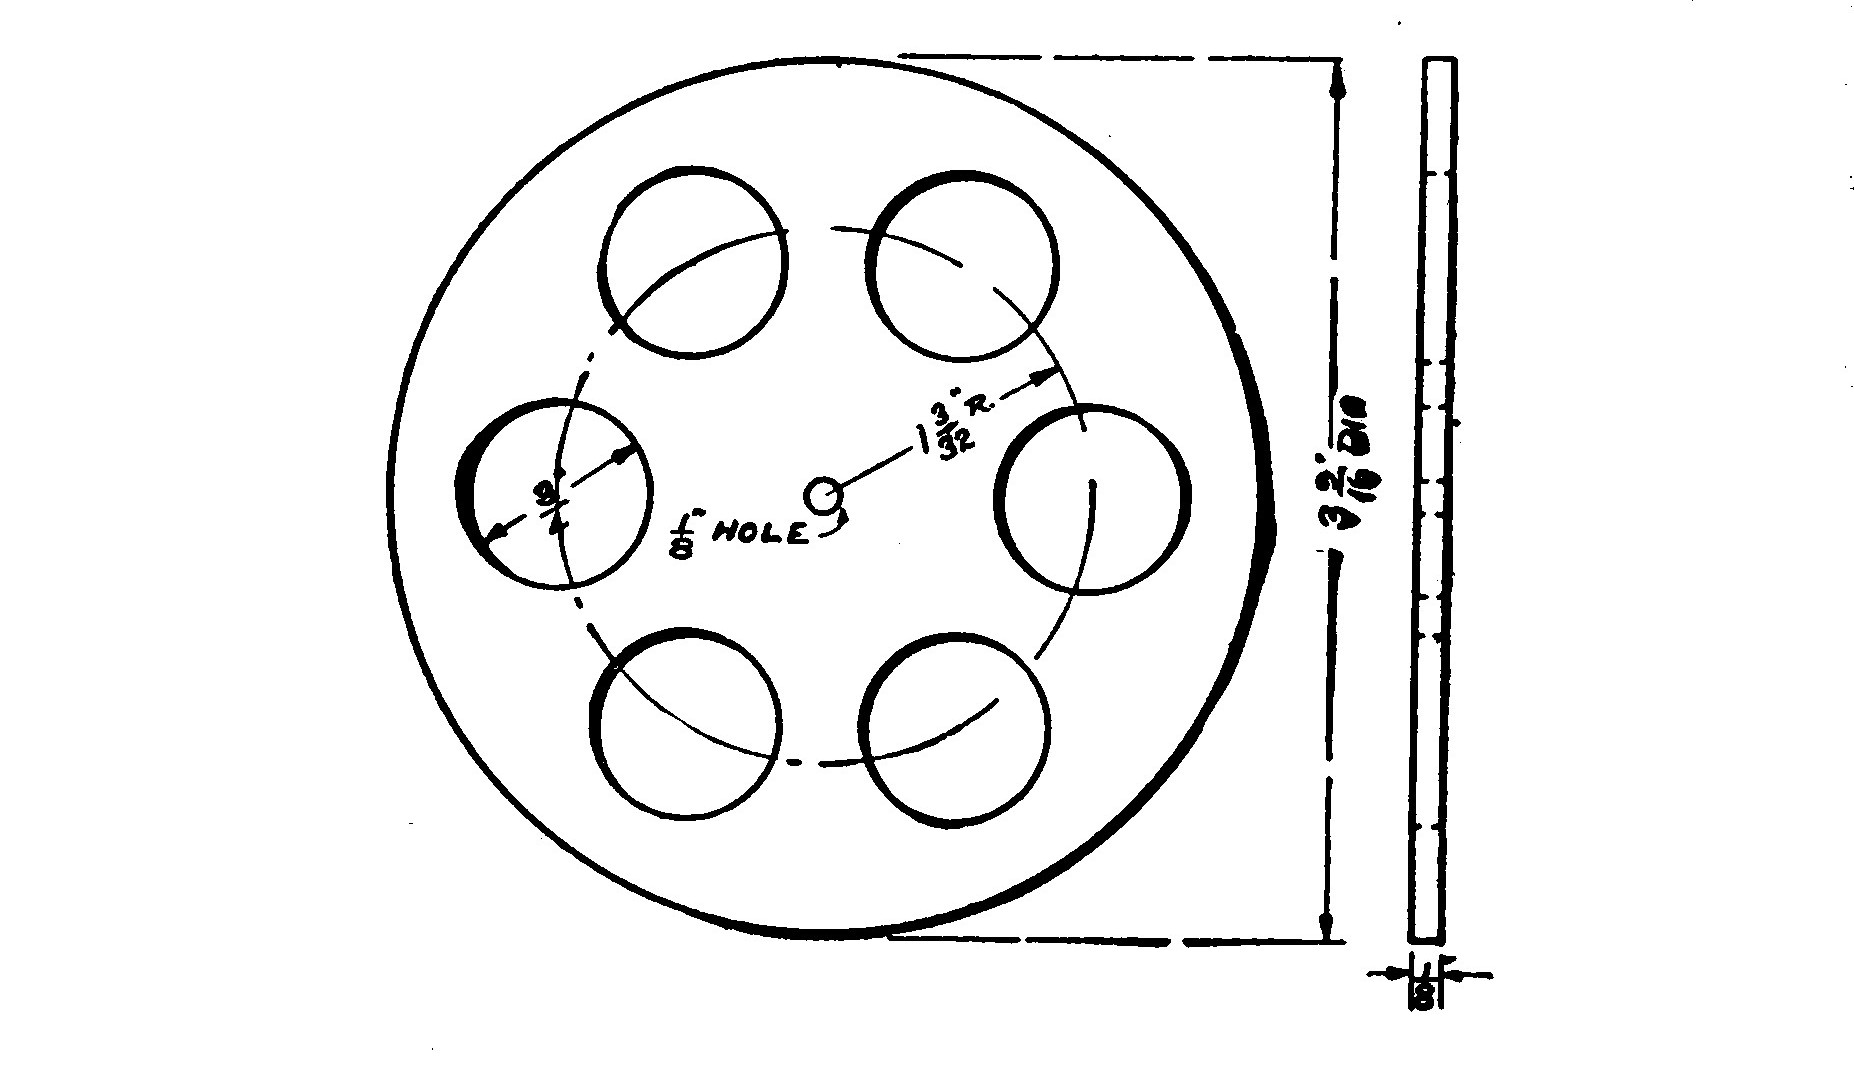 FIG. 58.—Showing how a Flywheel may be made out of sheet iron.